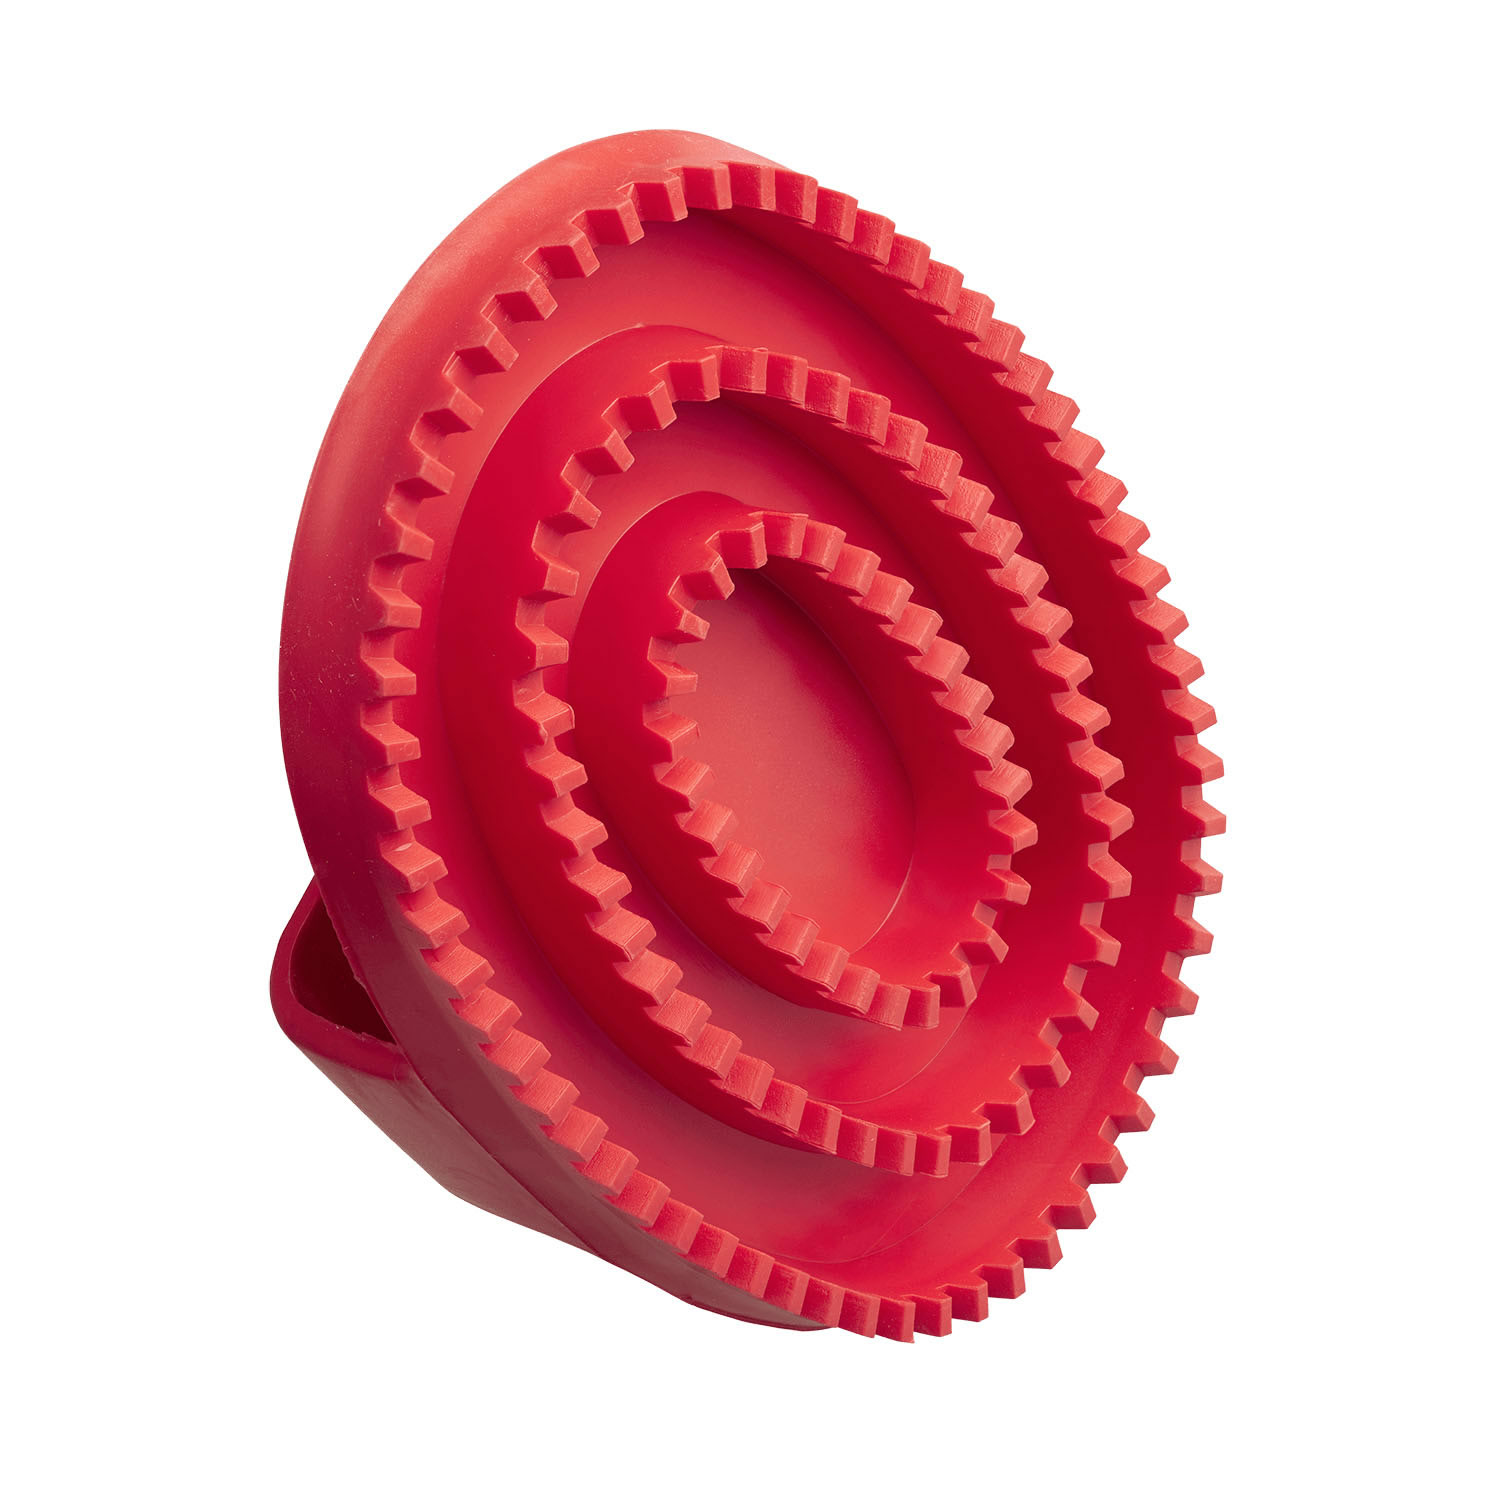 BITZ CURRY COMB RUBBER LARGE RED LARGE